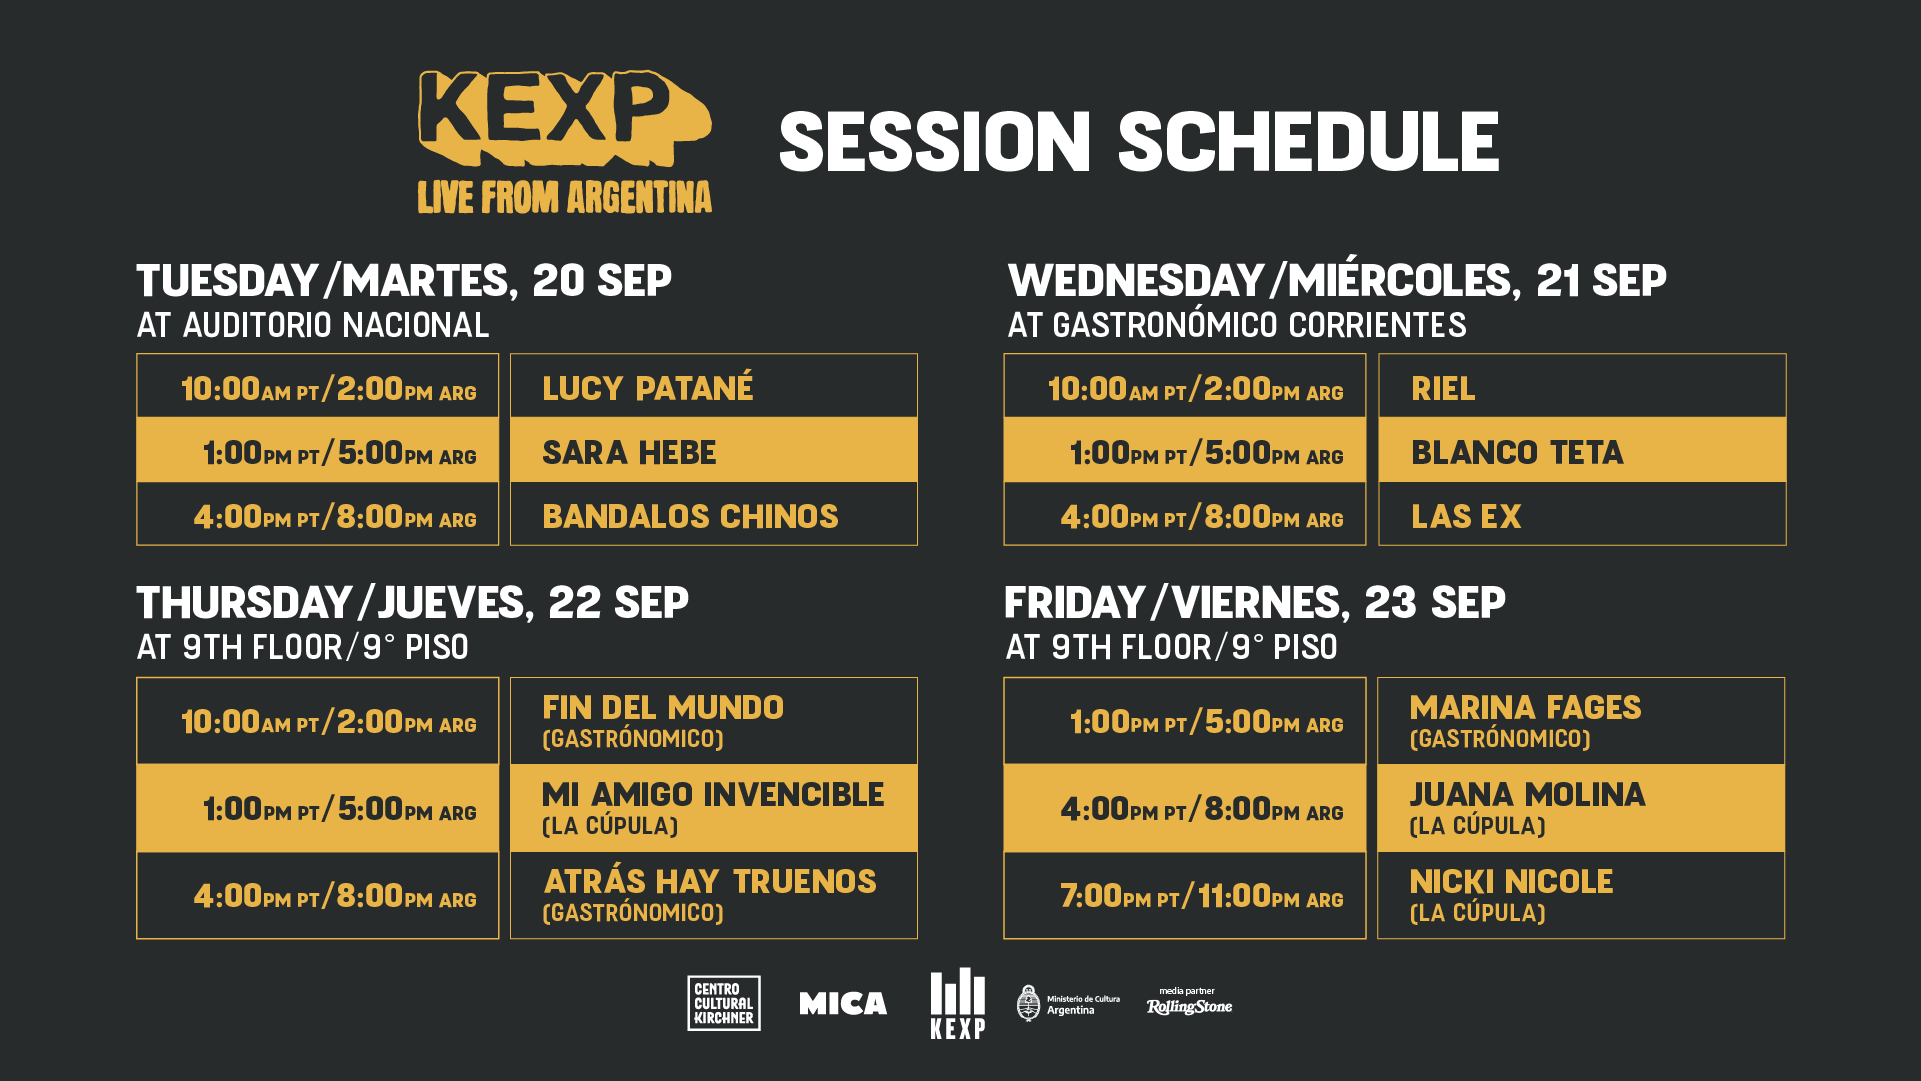 KEXP Live from Argentina Schedule w location 1920x1080.png